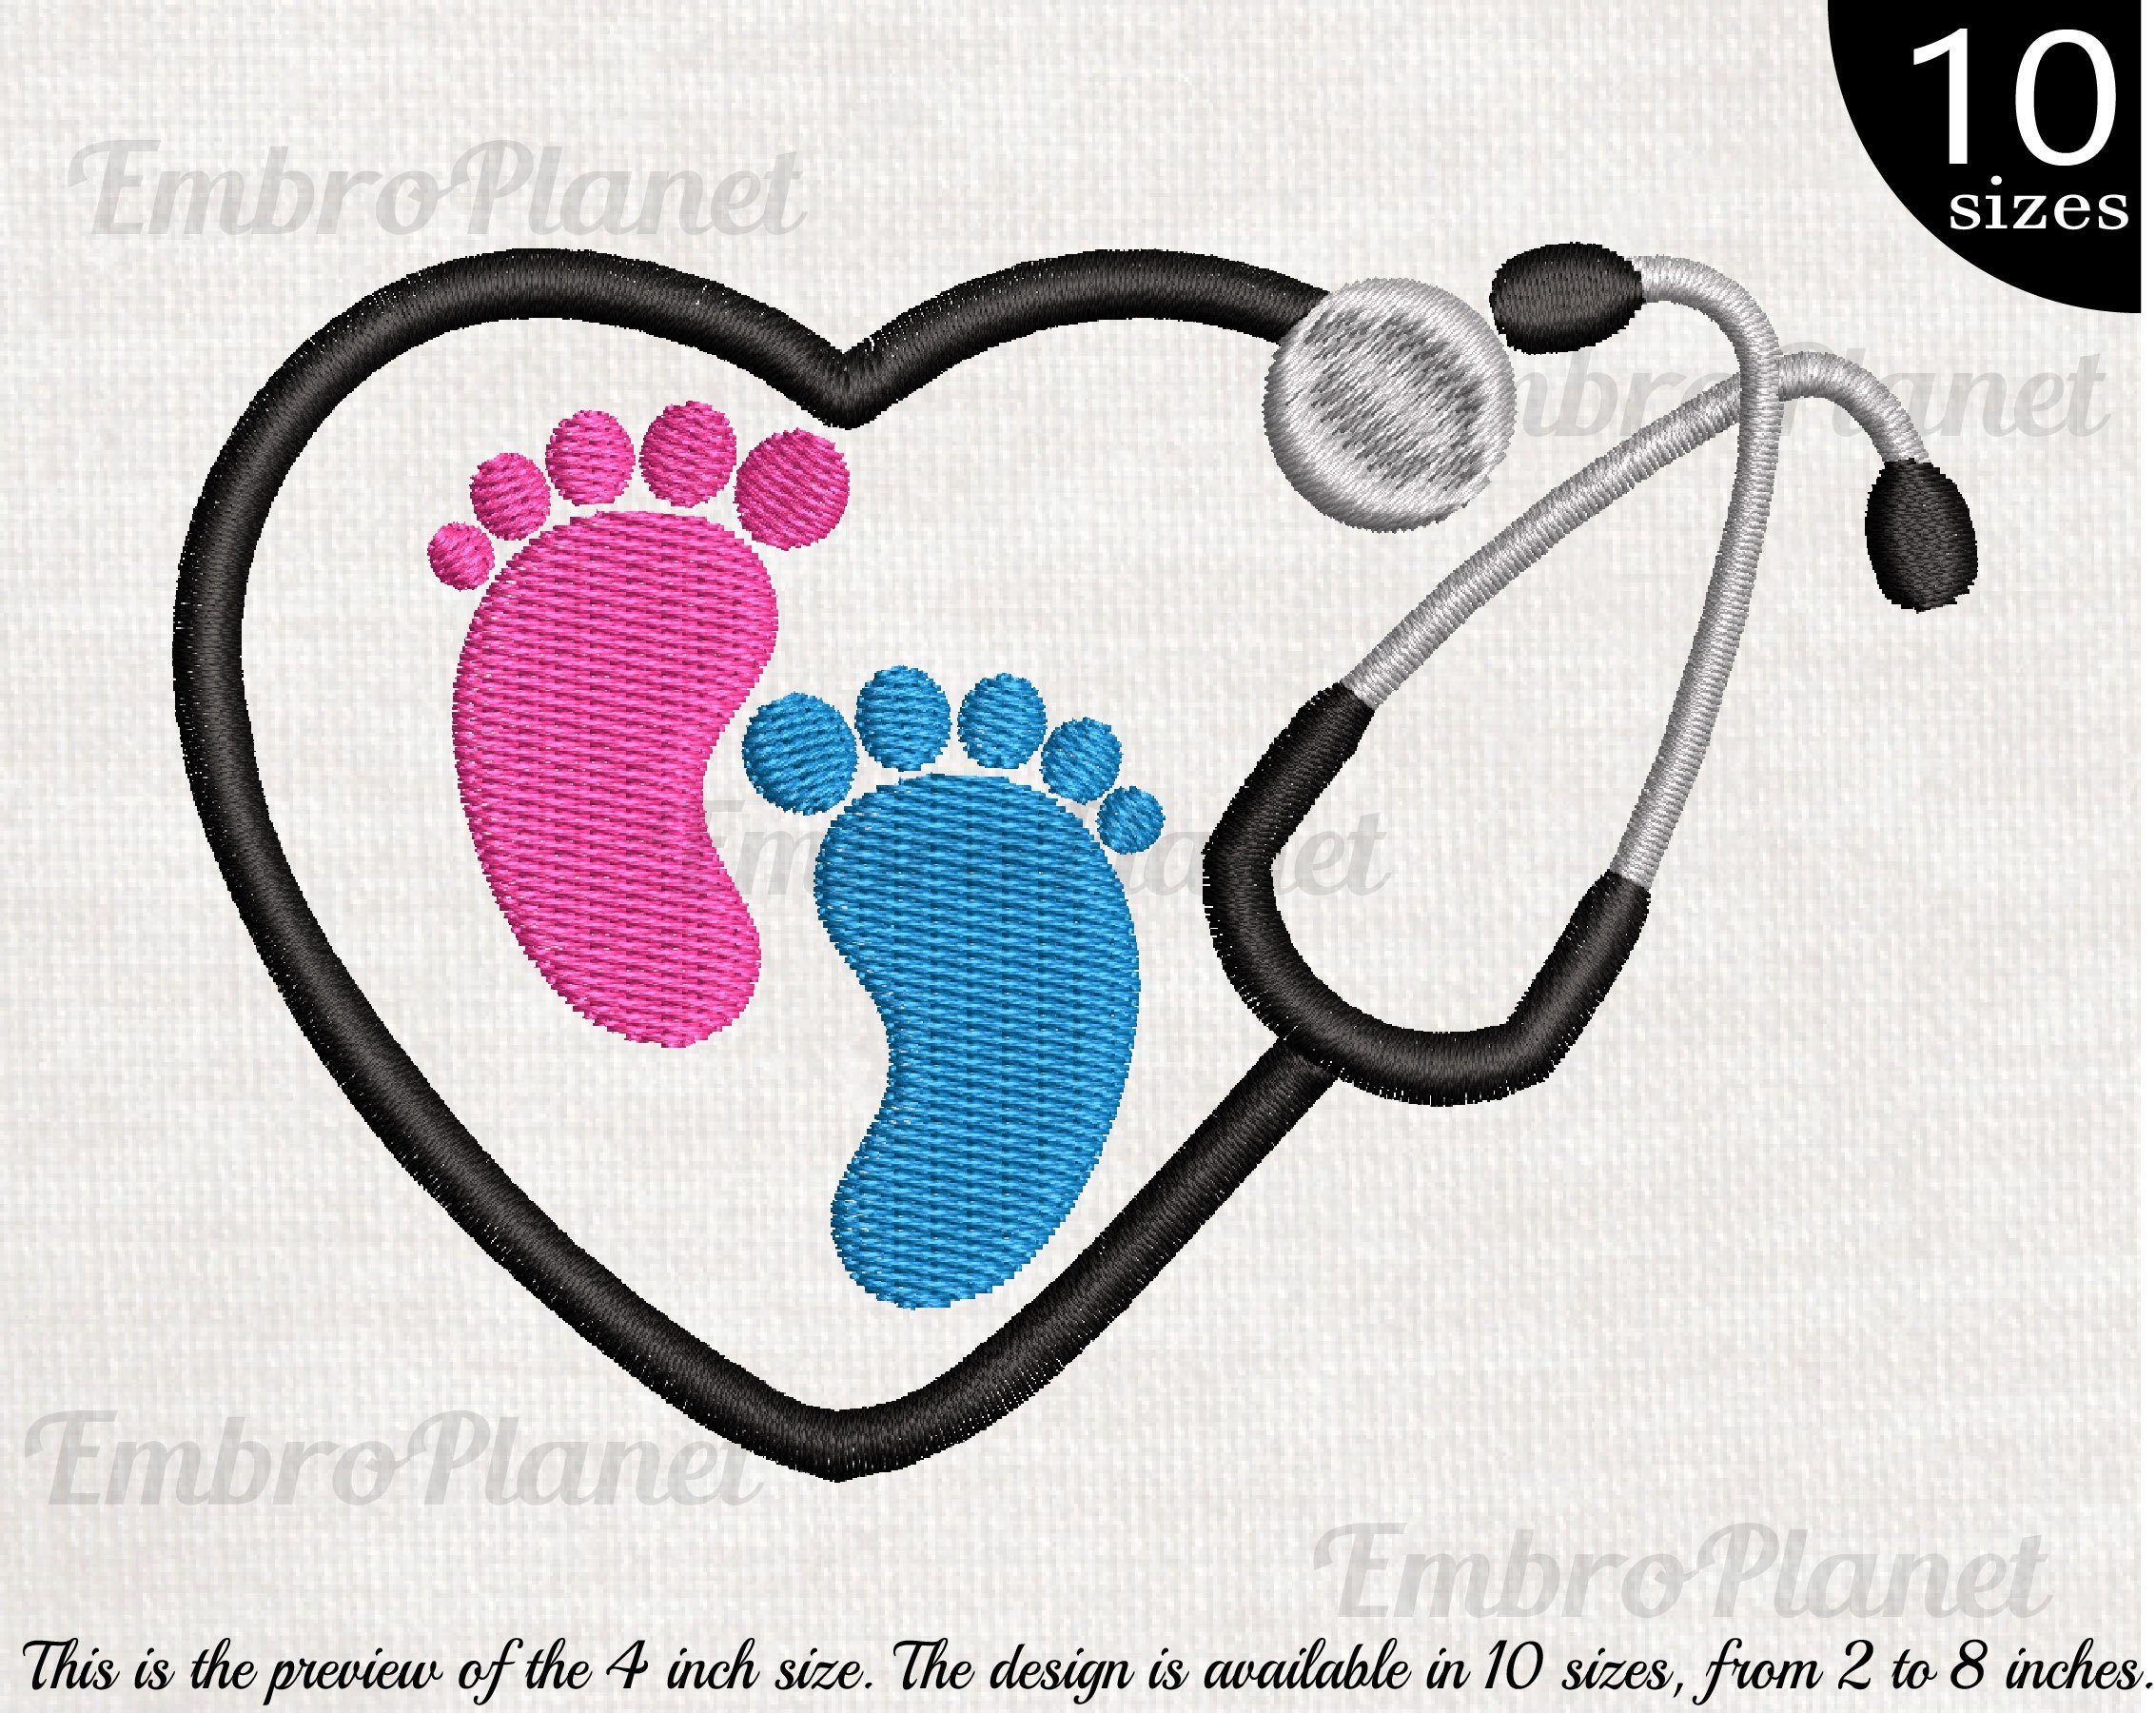 Baby Feets Heart Stethoscope Design for Embroidery Machine - Etsy